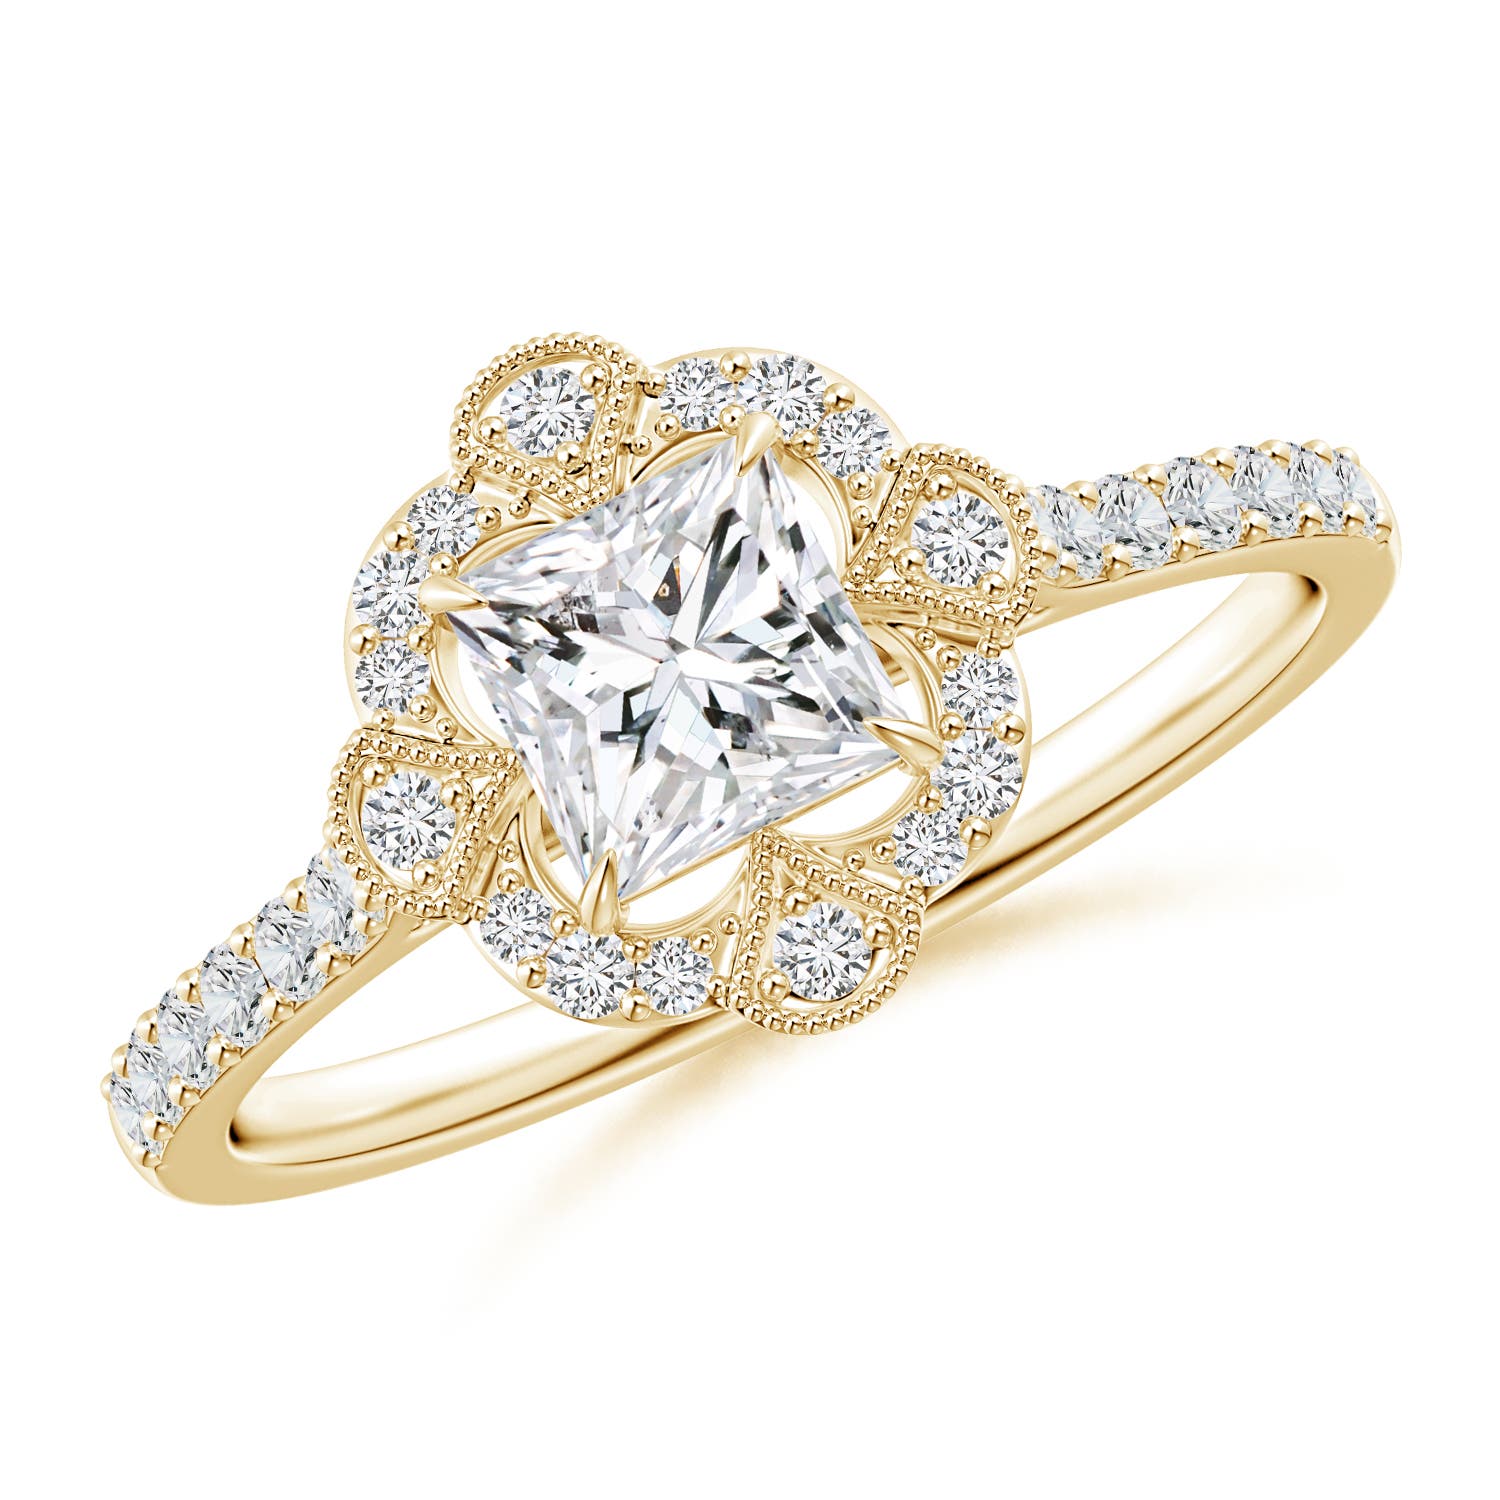 H, SI2 / 0.9 CT / 14 KT Yellow Gold